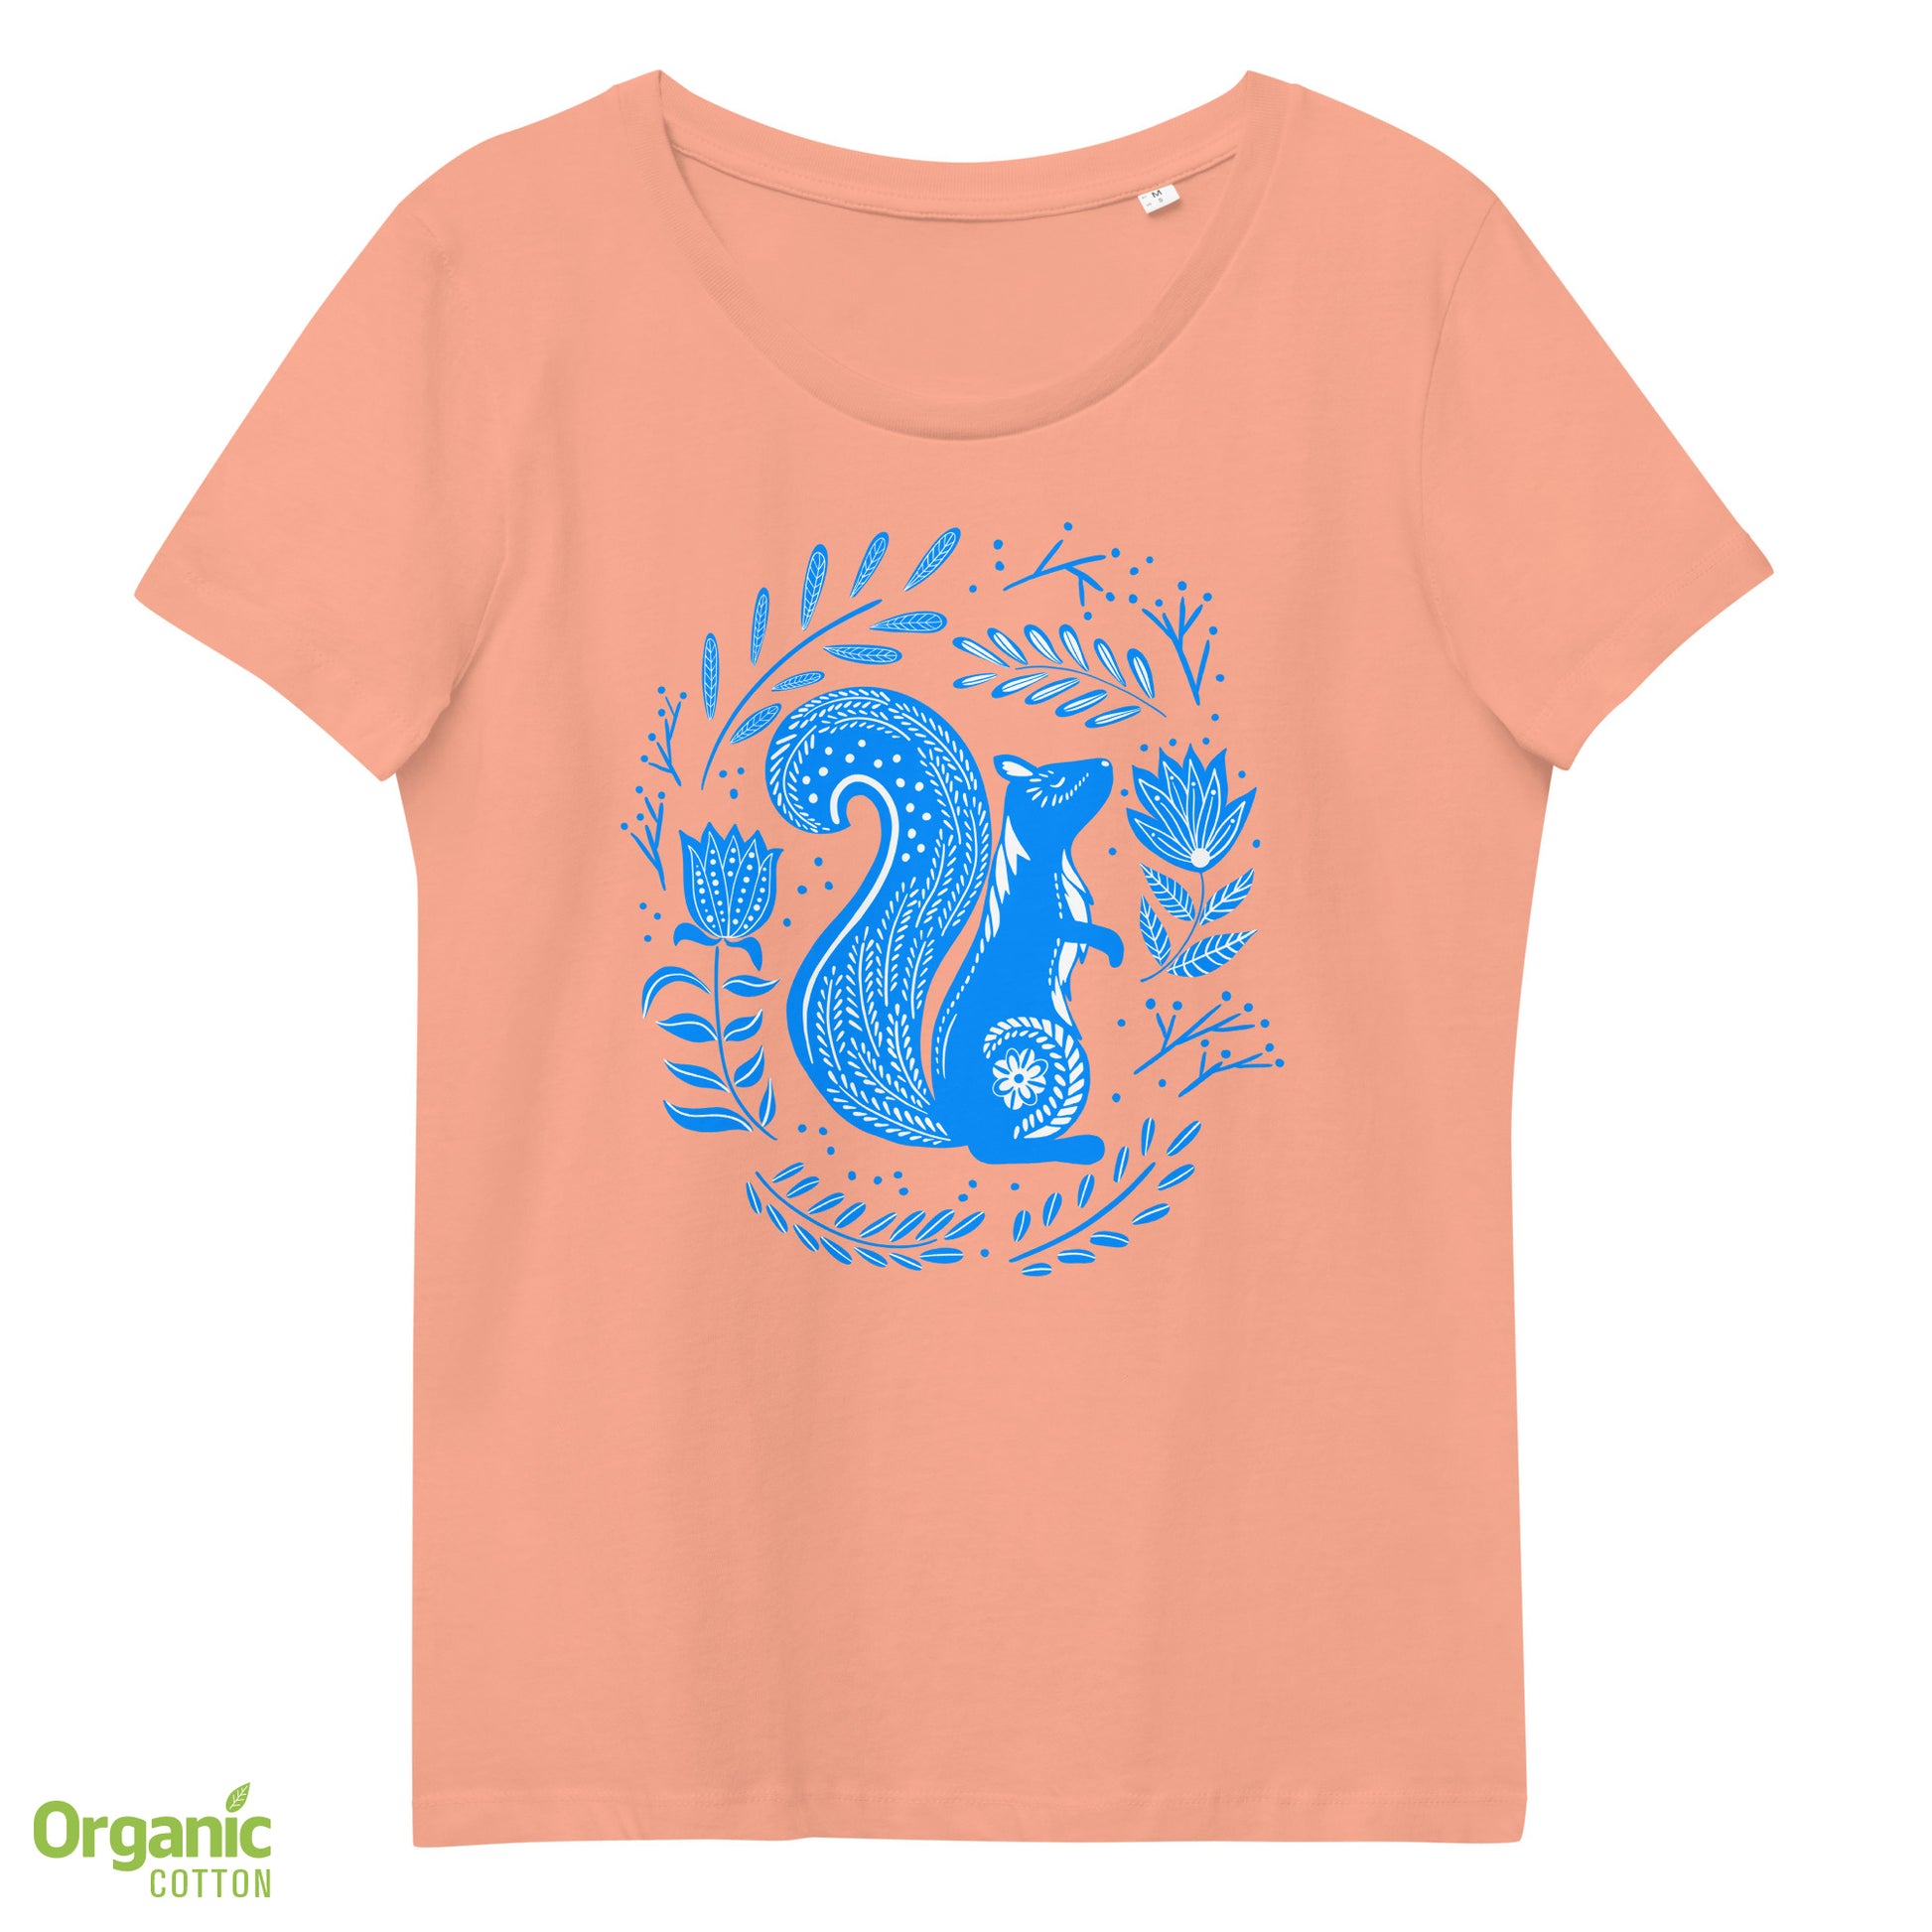 Forest Fairytales - The squirrel - Women's fitted eco tee - Shirts & Tops- Print N Stuff - [designed in Turku FInland]